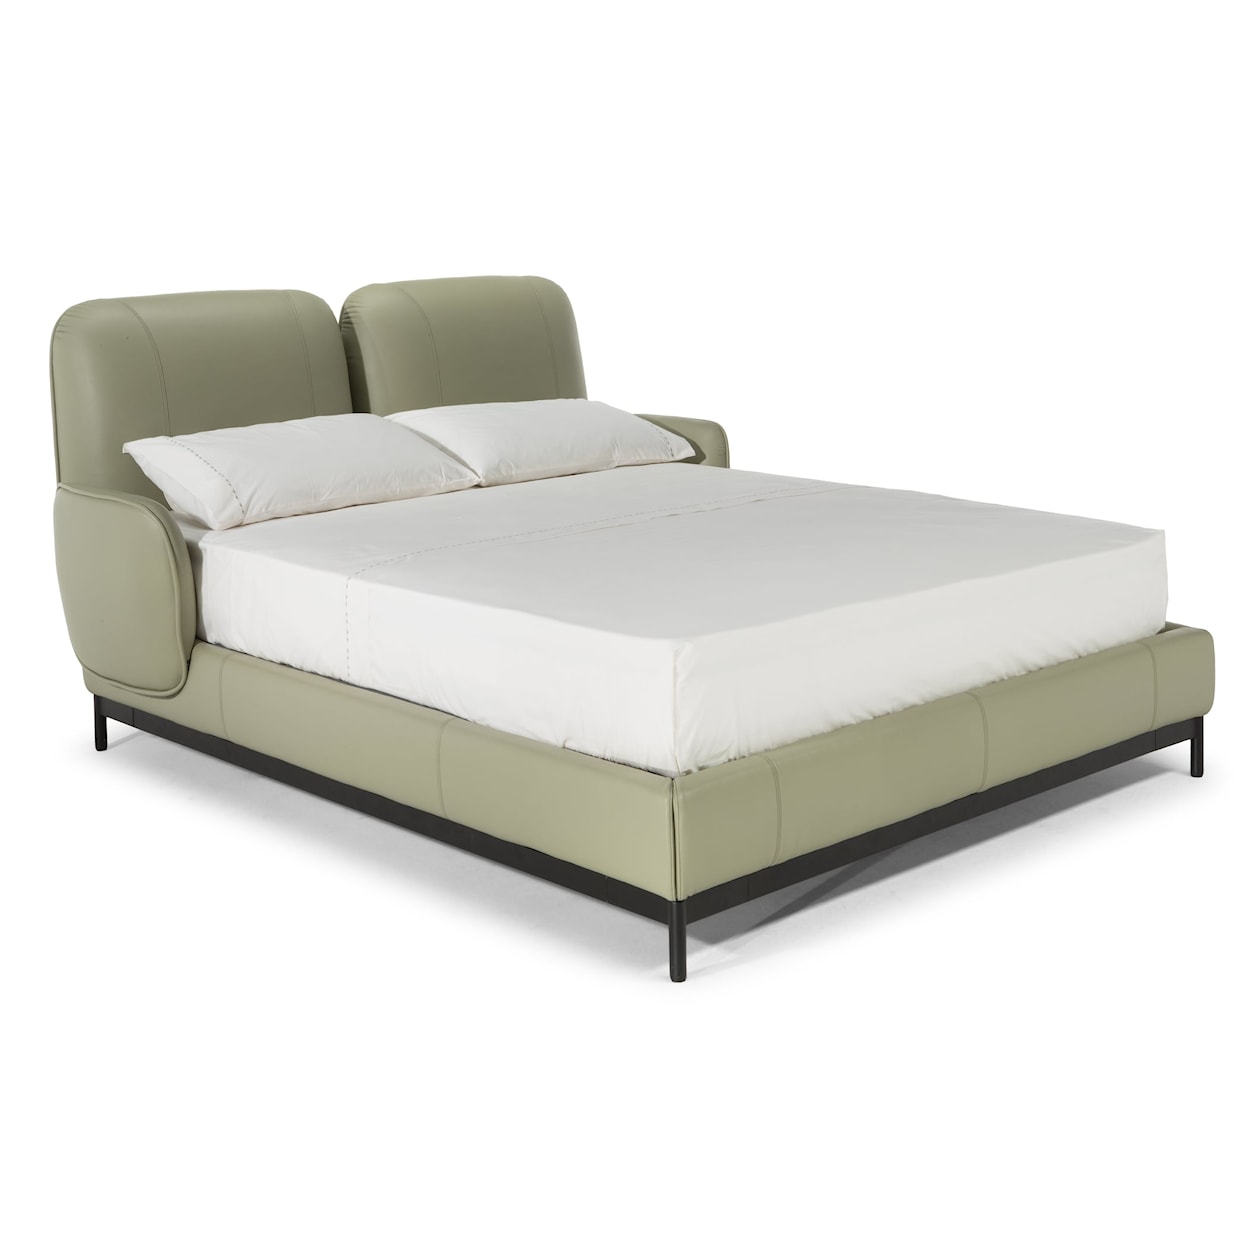 Natuzzi Editions Bed Group King Bed